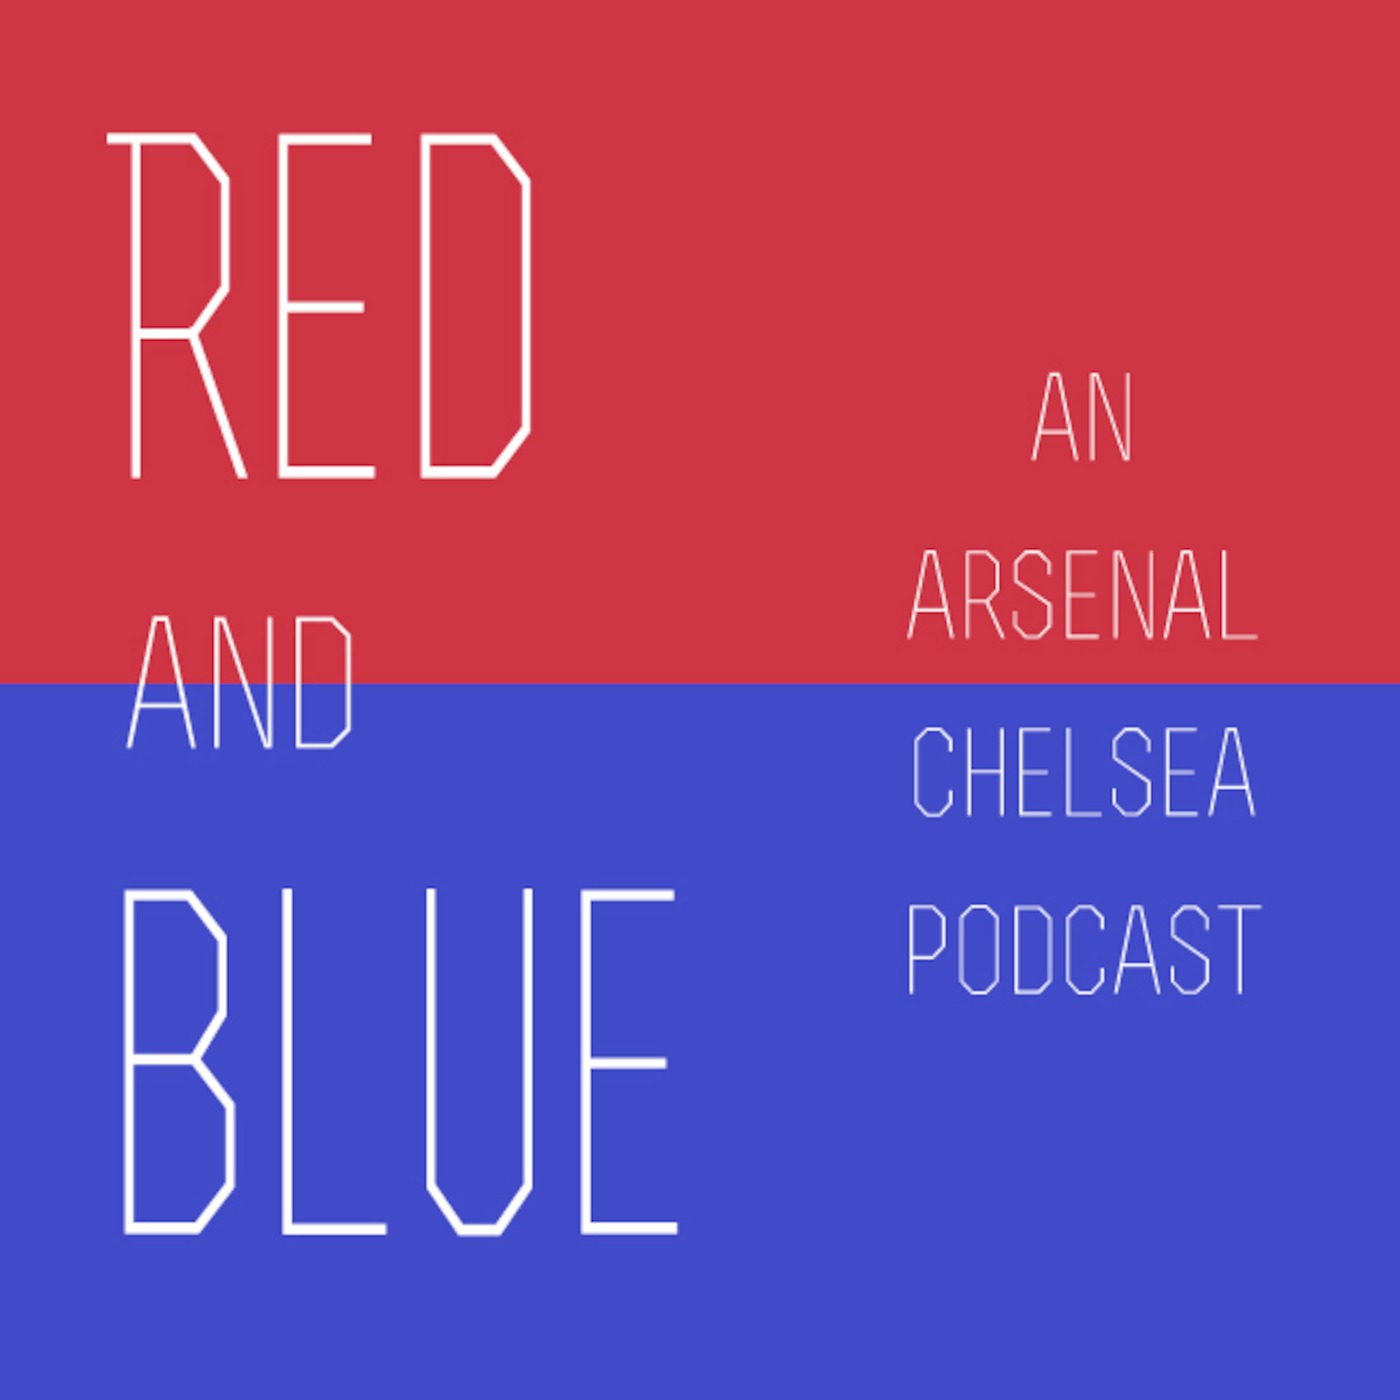 Red & Blue Football - An Arsenal and Chelsea Podcast